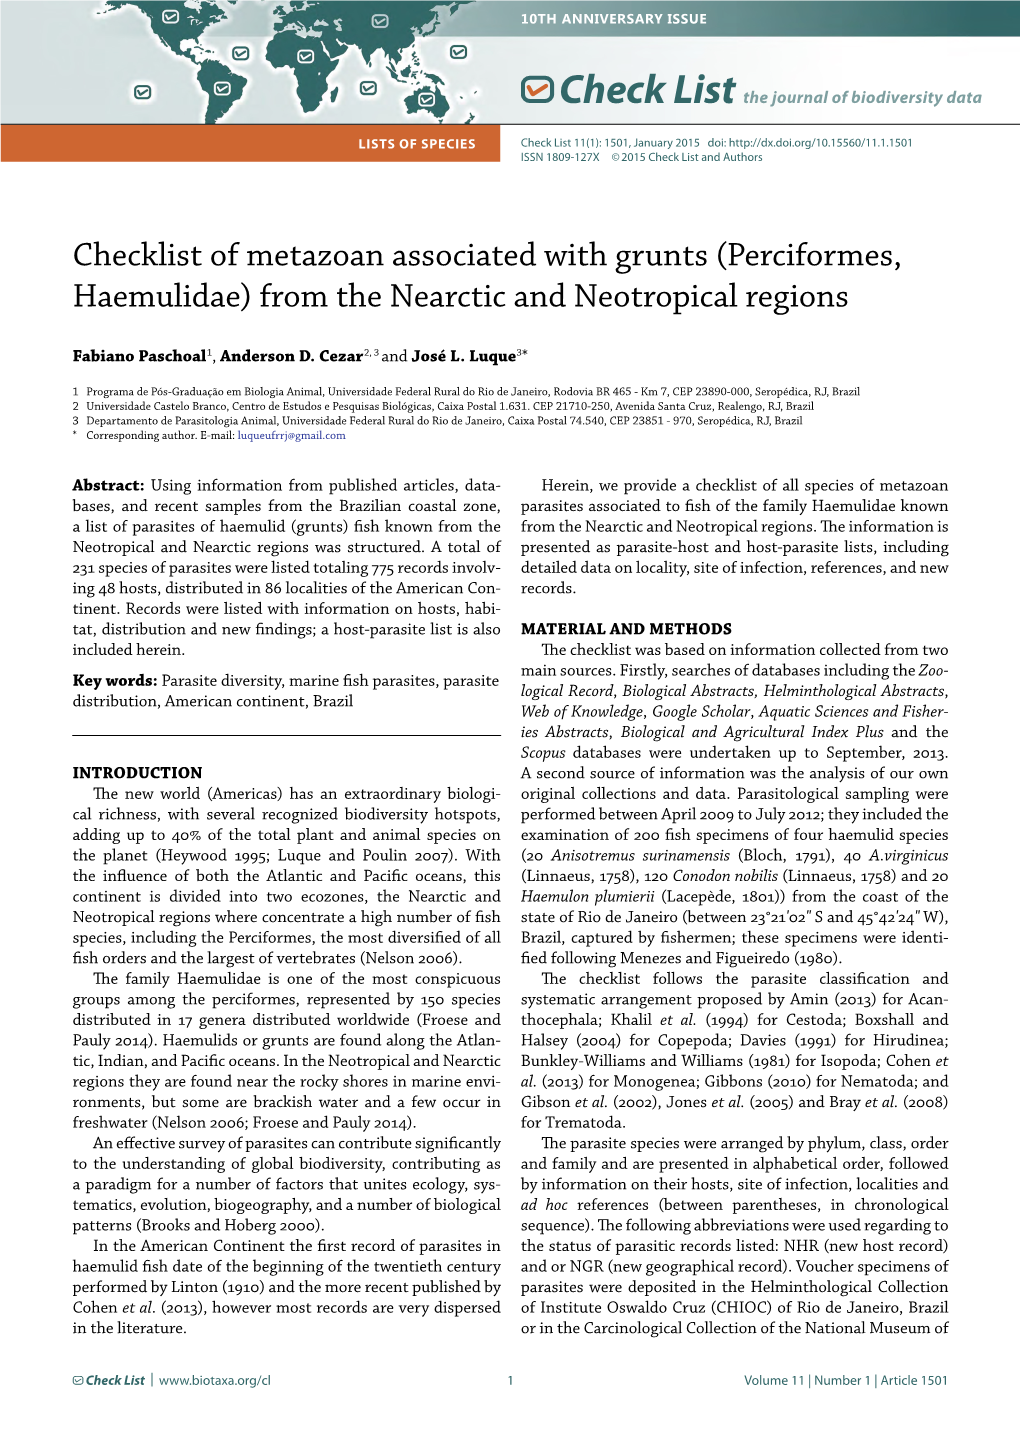 Checklist of Metazoan Associated with Grunts (Perciformes, Haemulidae) from the Nearctic and Neotropical Regions